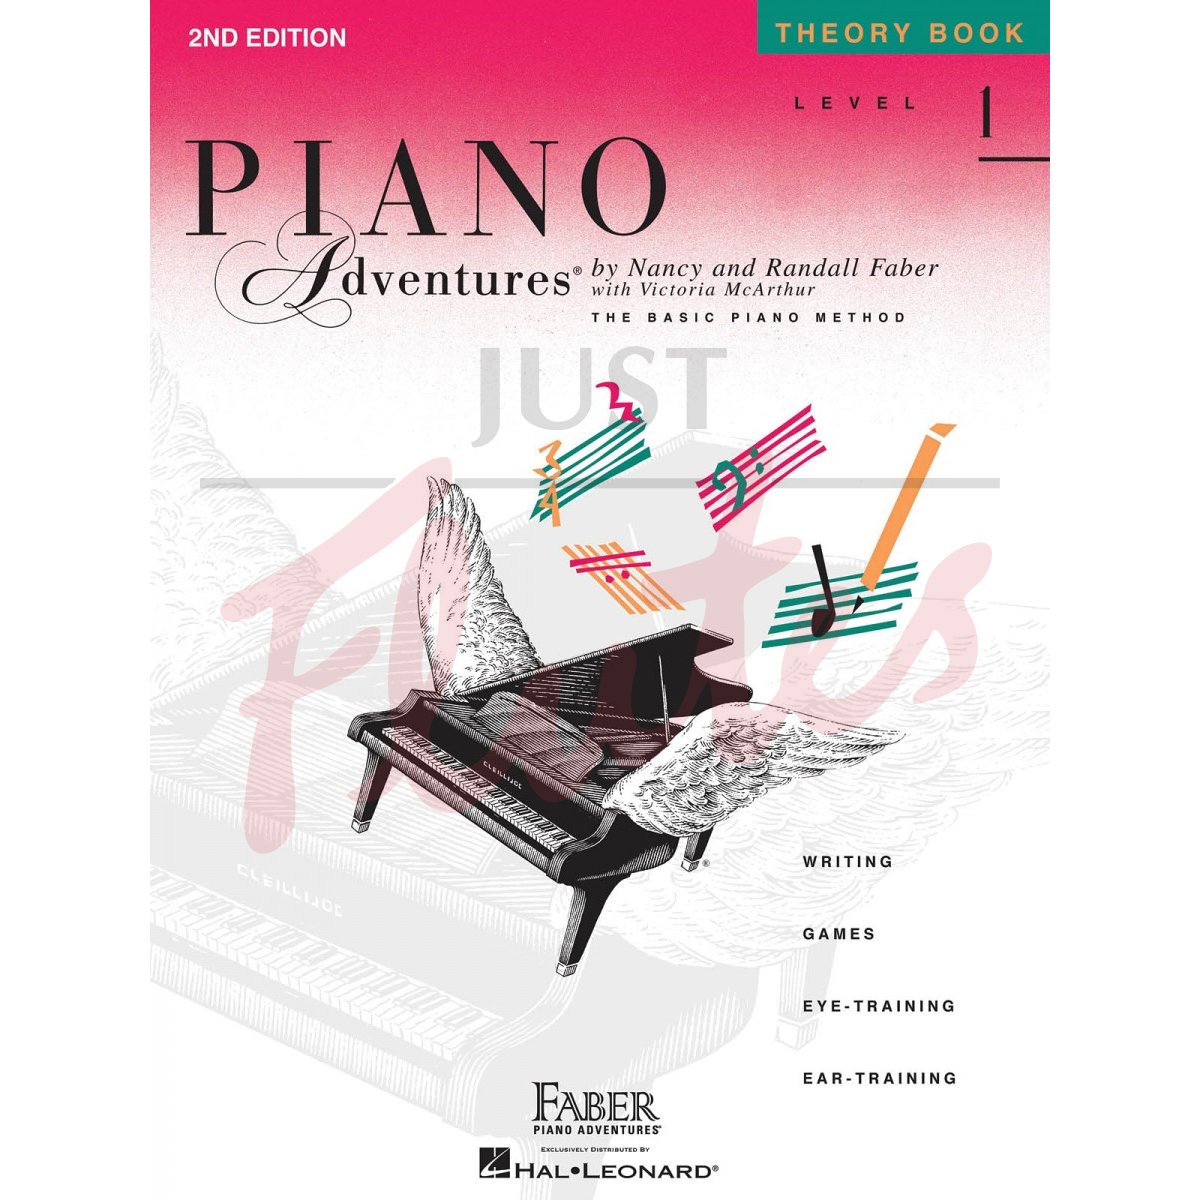 Piano Adventures - Theory Book Level 1